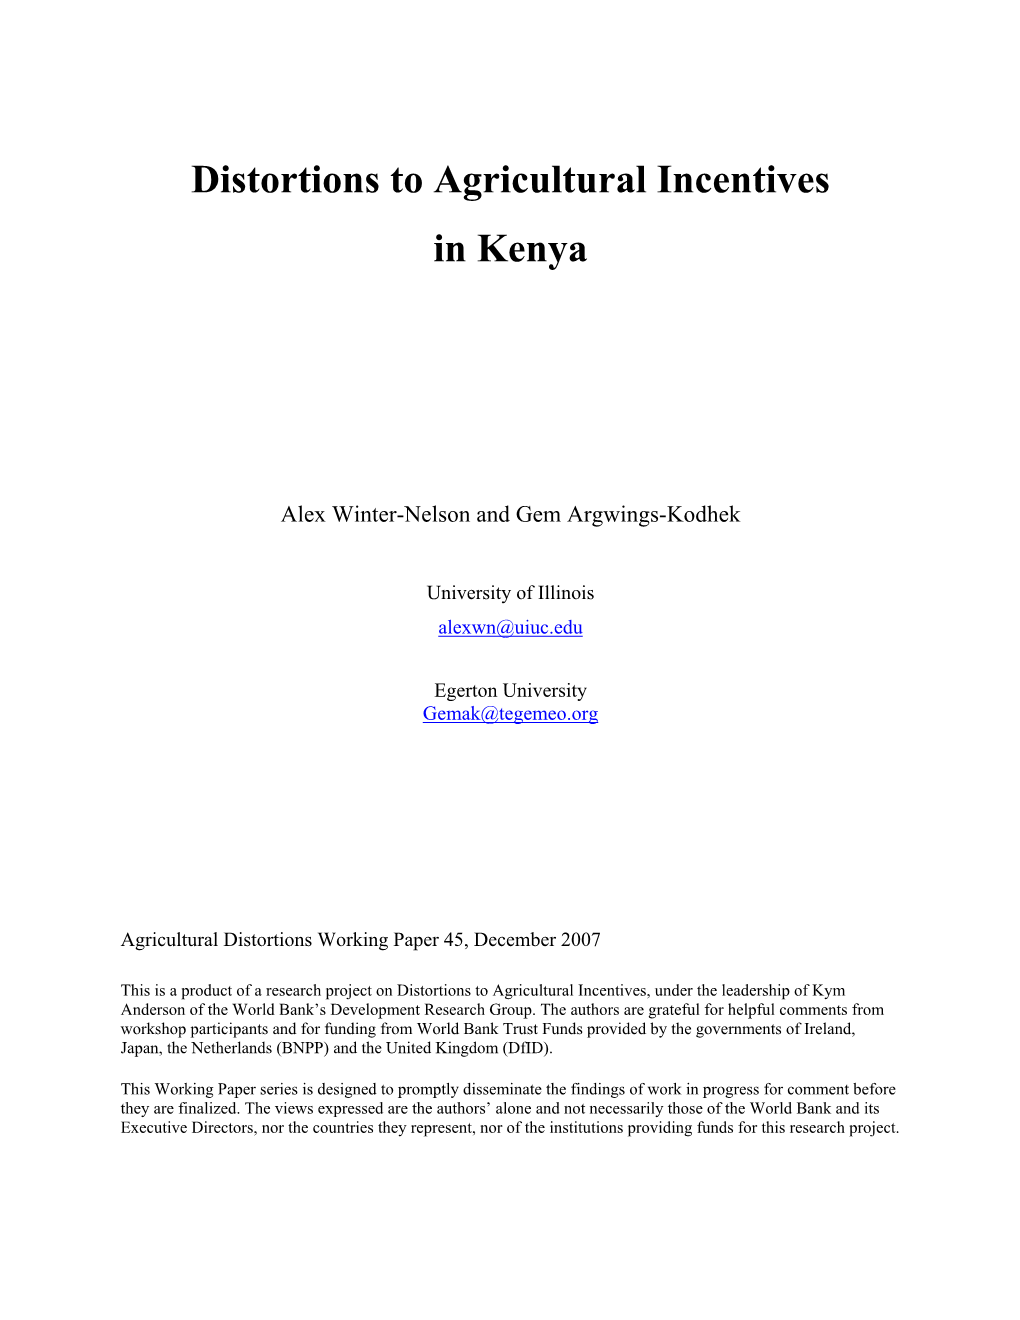 Distortions to Agricultural Incentives in Kenya